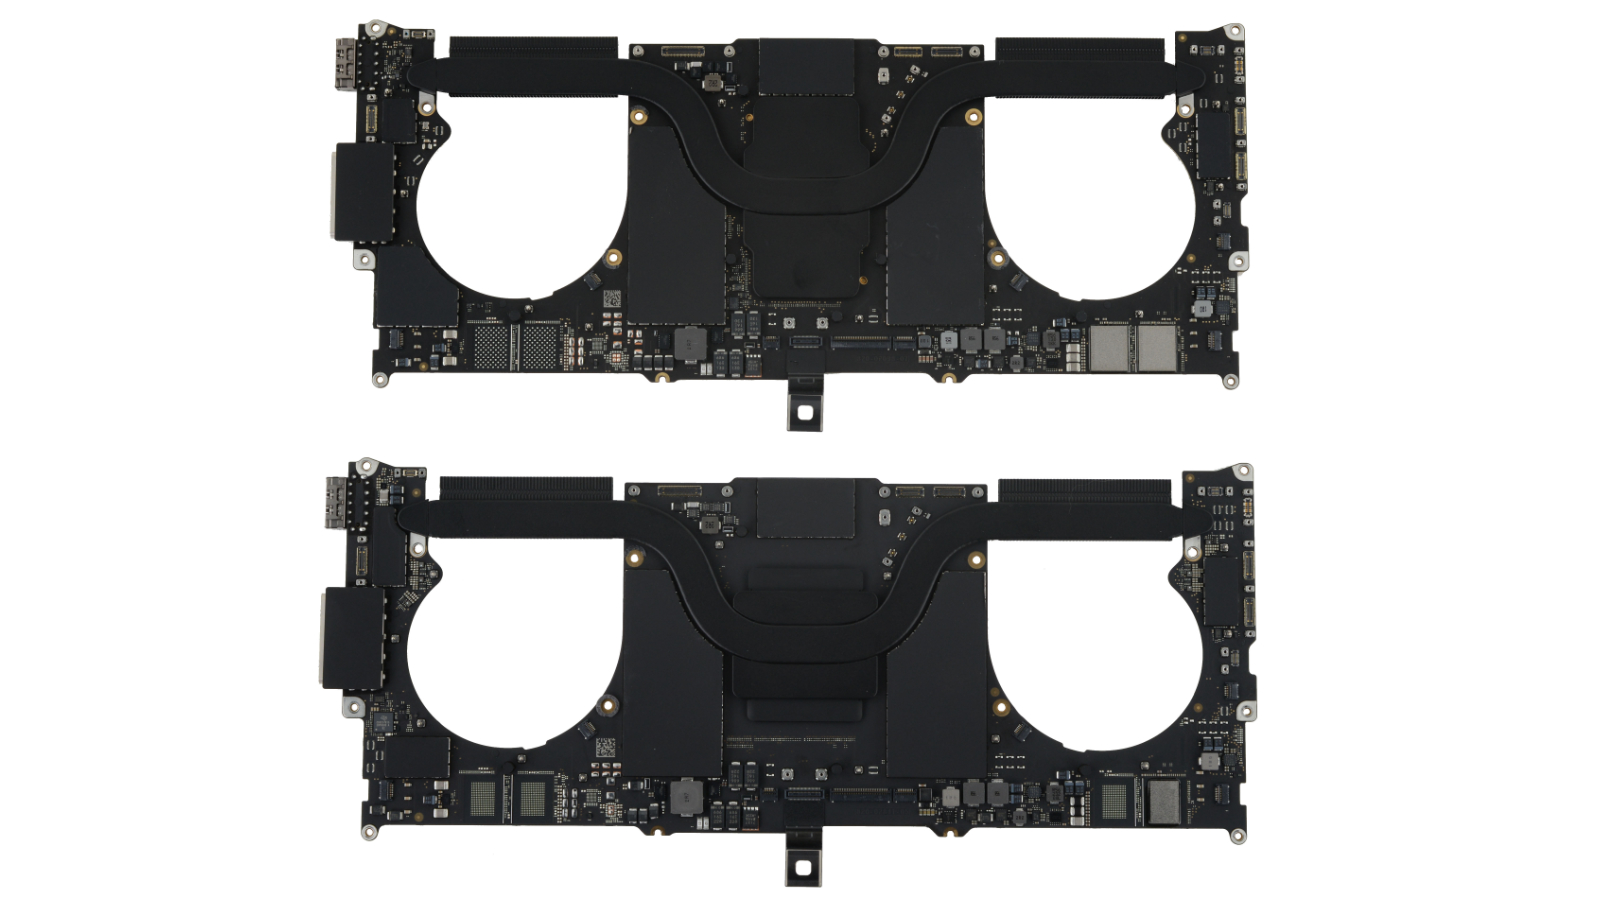 New MacBook Pro Features Smaller Heatsink Due to Supply Chain Issues